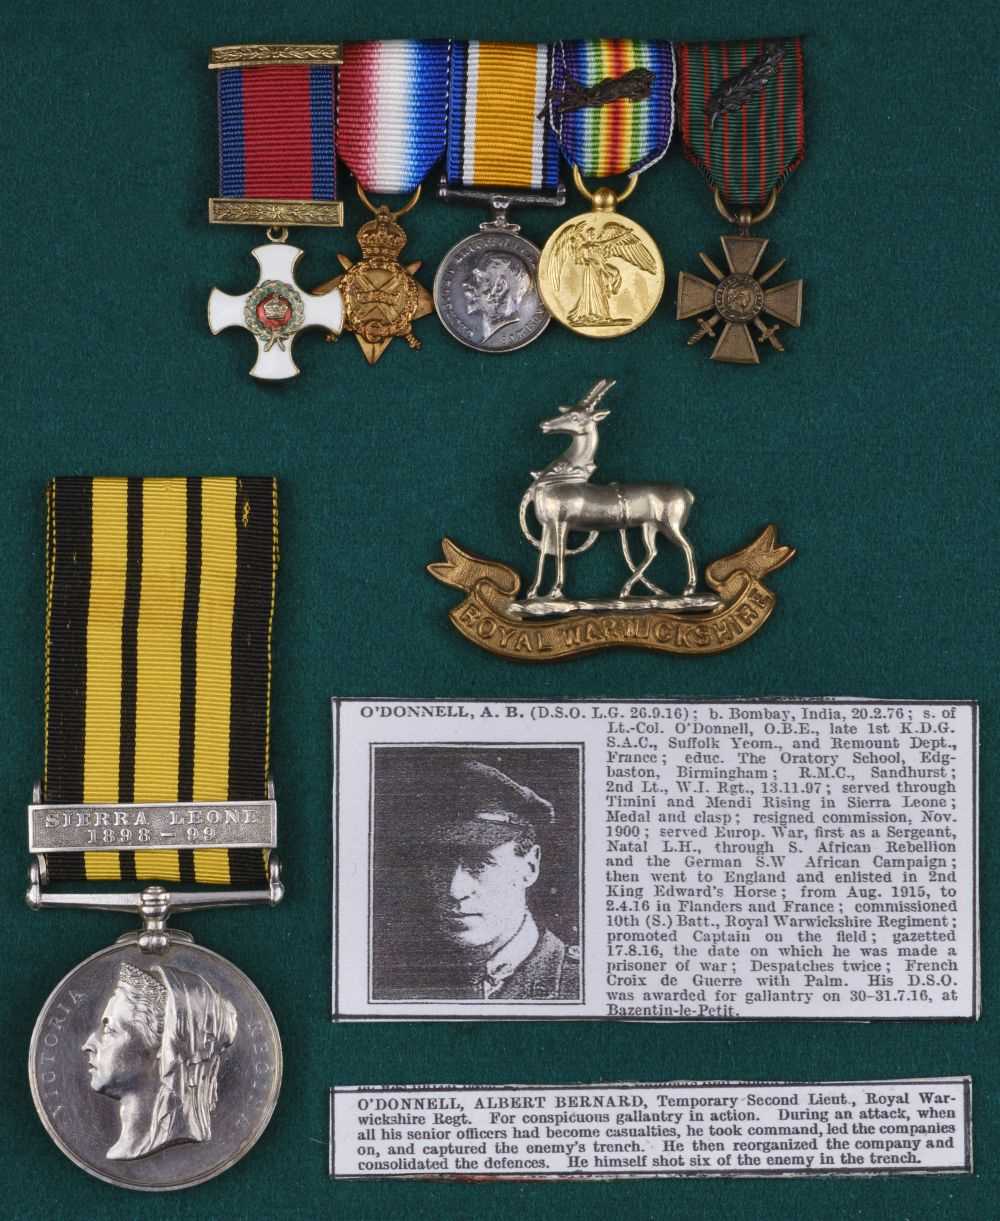 Lot 120 - East and West Africa Medal to Lieutenant A.B. O'Donnell, D.S.O., M.I.D., West India Regiment